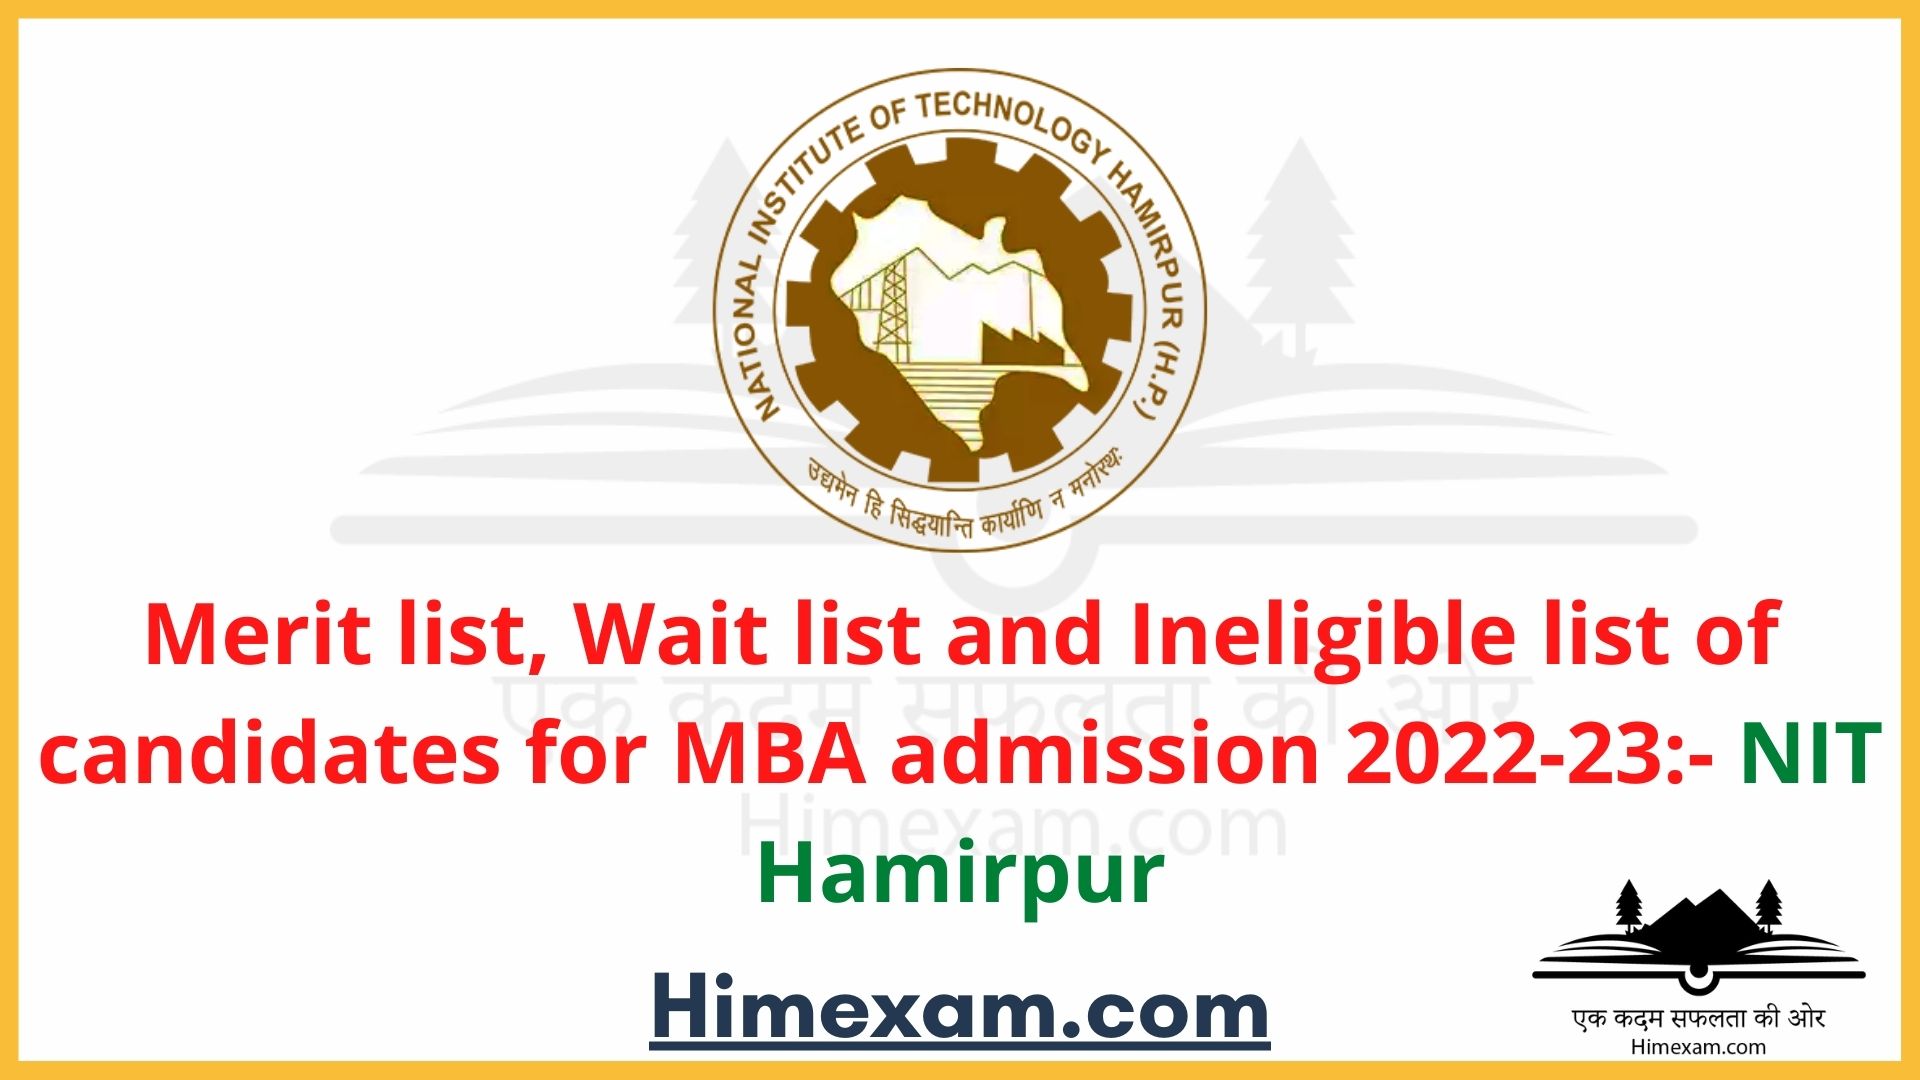 Merit list, Wait list and Ineligible list of candidates for MBA admission 2022-23:- NIT Hamirpur